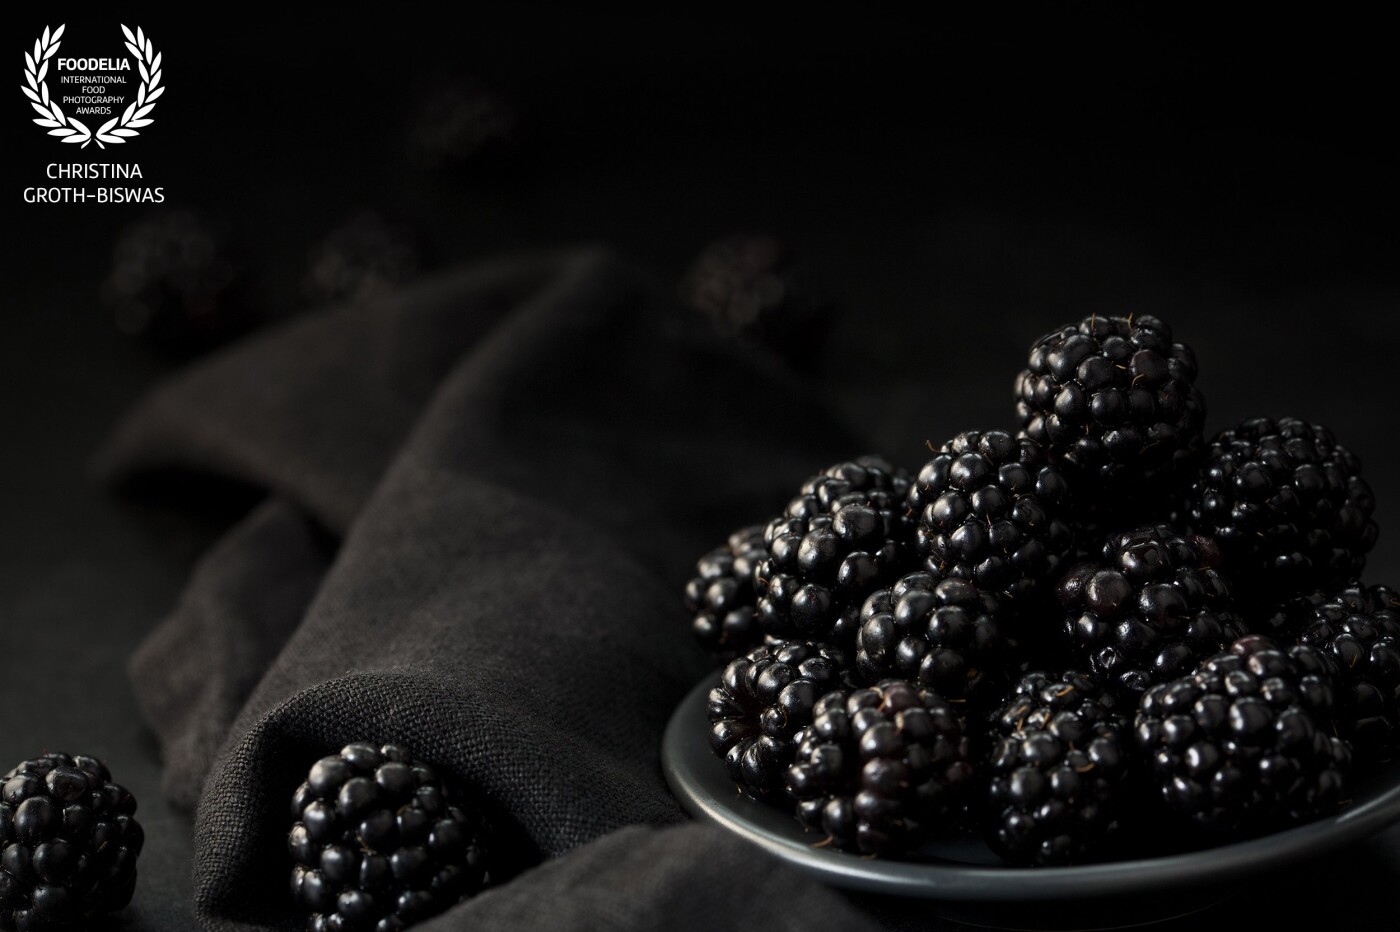 50 shades of black. I love blackberries, not only are they very healthy but they are also very photogenic.<br />
This picture was an experiment as it is all black. I found it very interesting to show how the different textures, which are all black, came out in the picture.